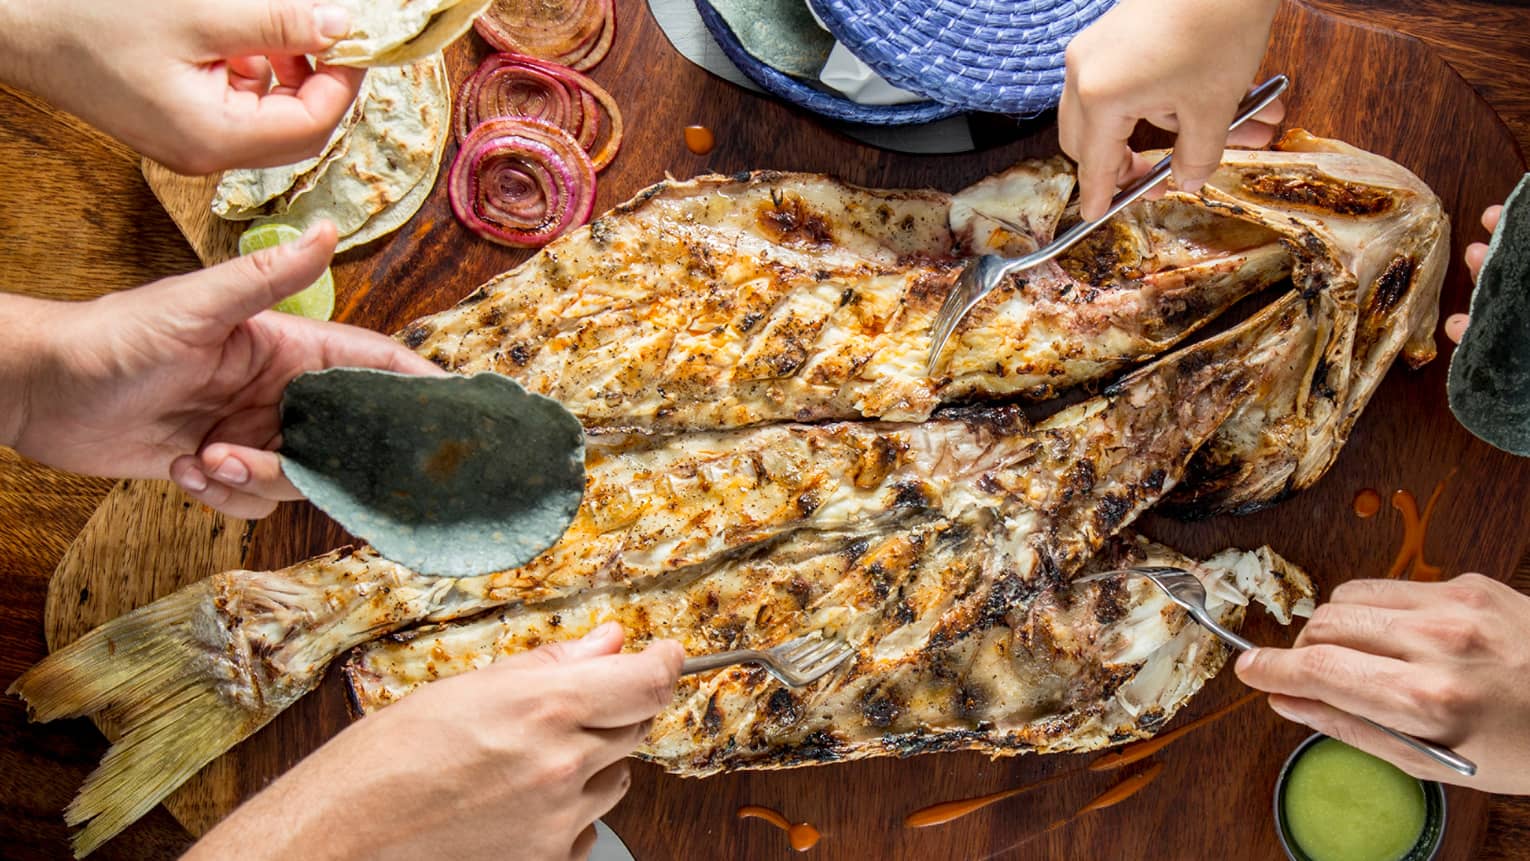 Aerial view of table, hands holding forks, digging into whole grilled fish on platter